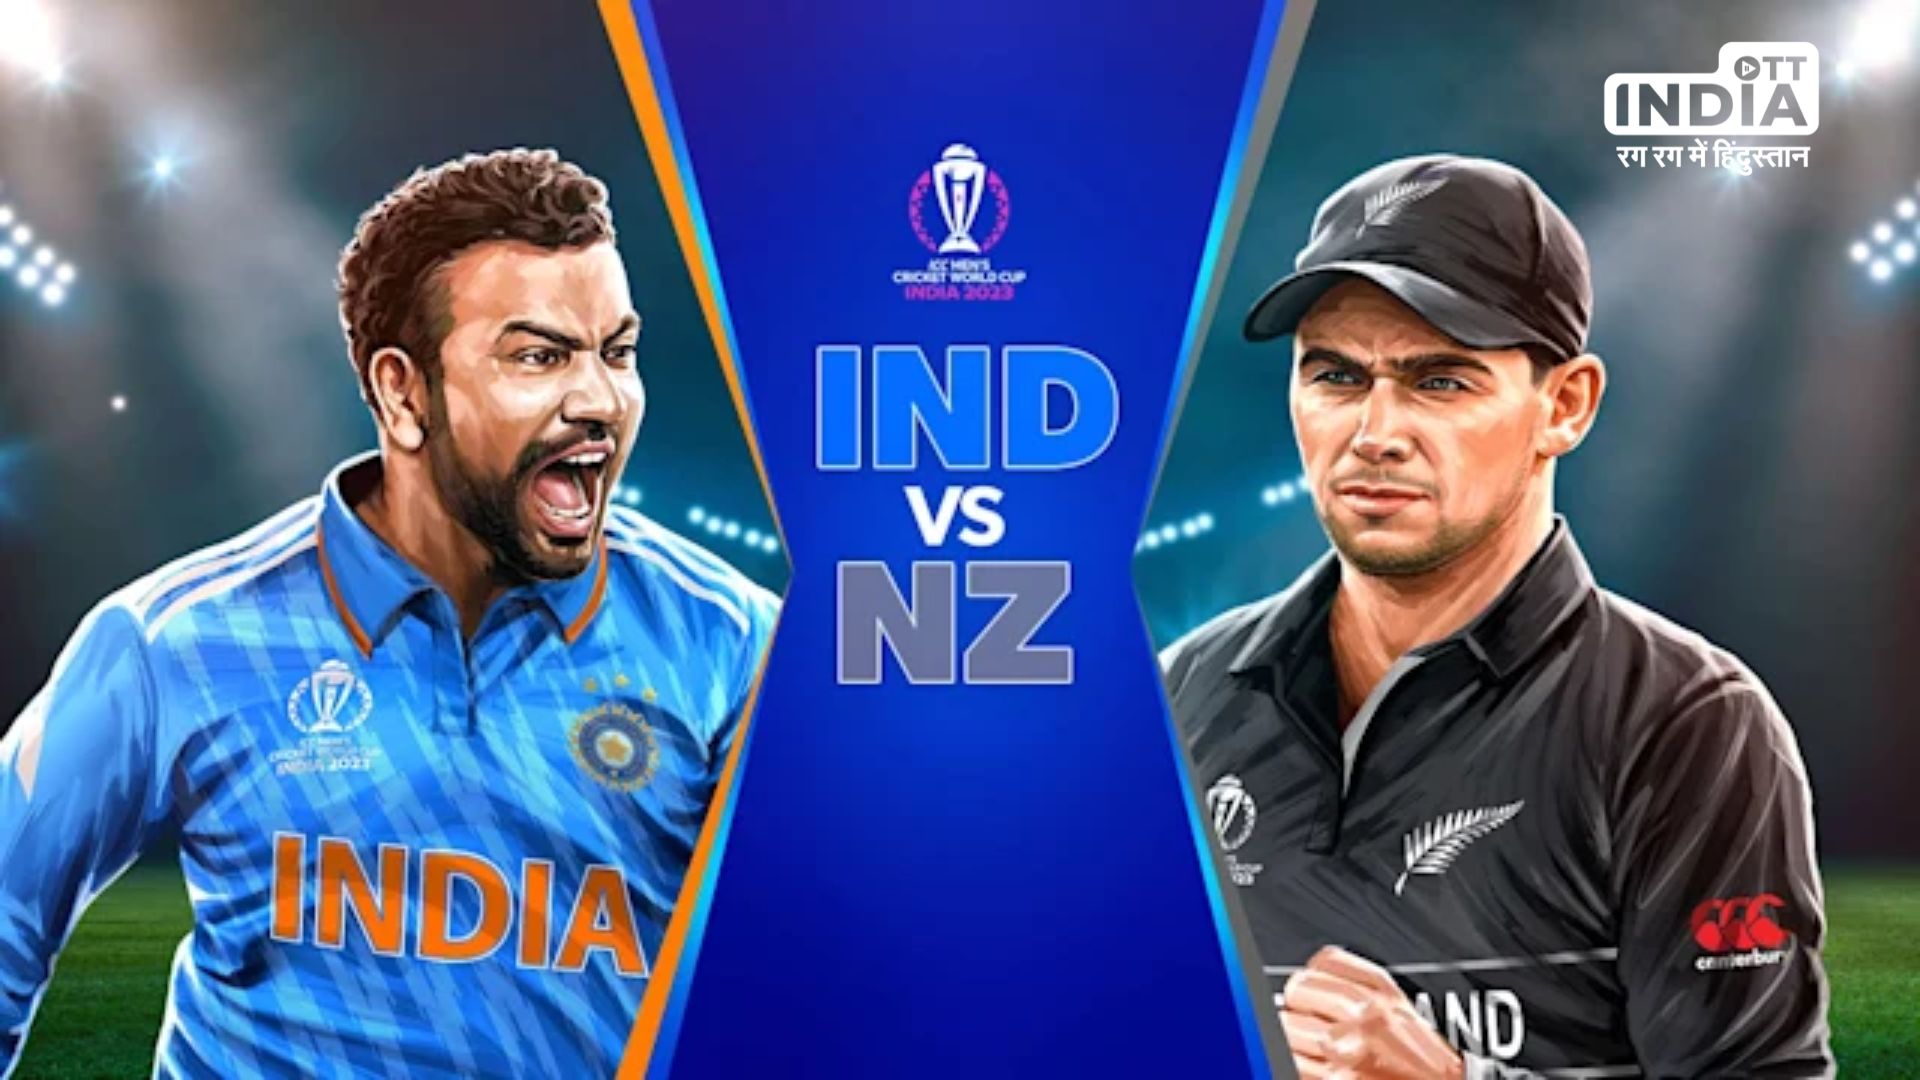 Ind Vs Nz Match is more important than World Cup Final 2023